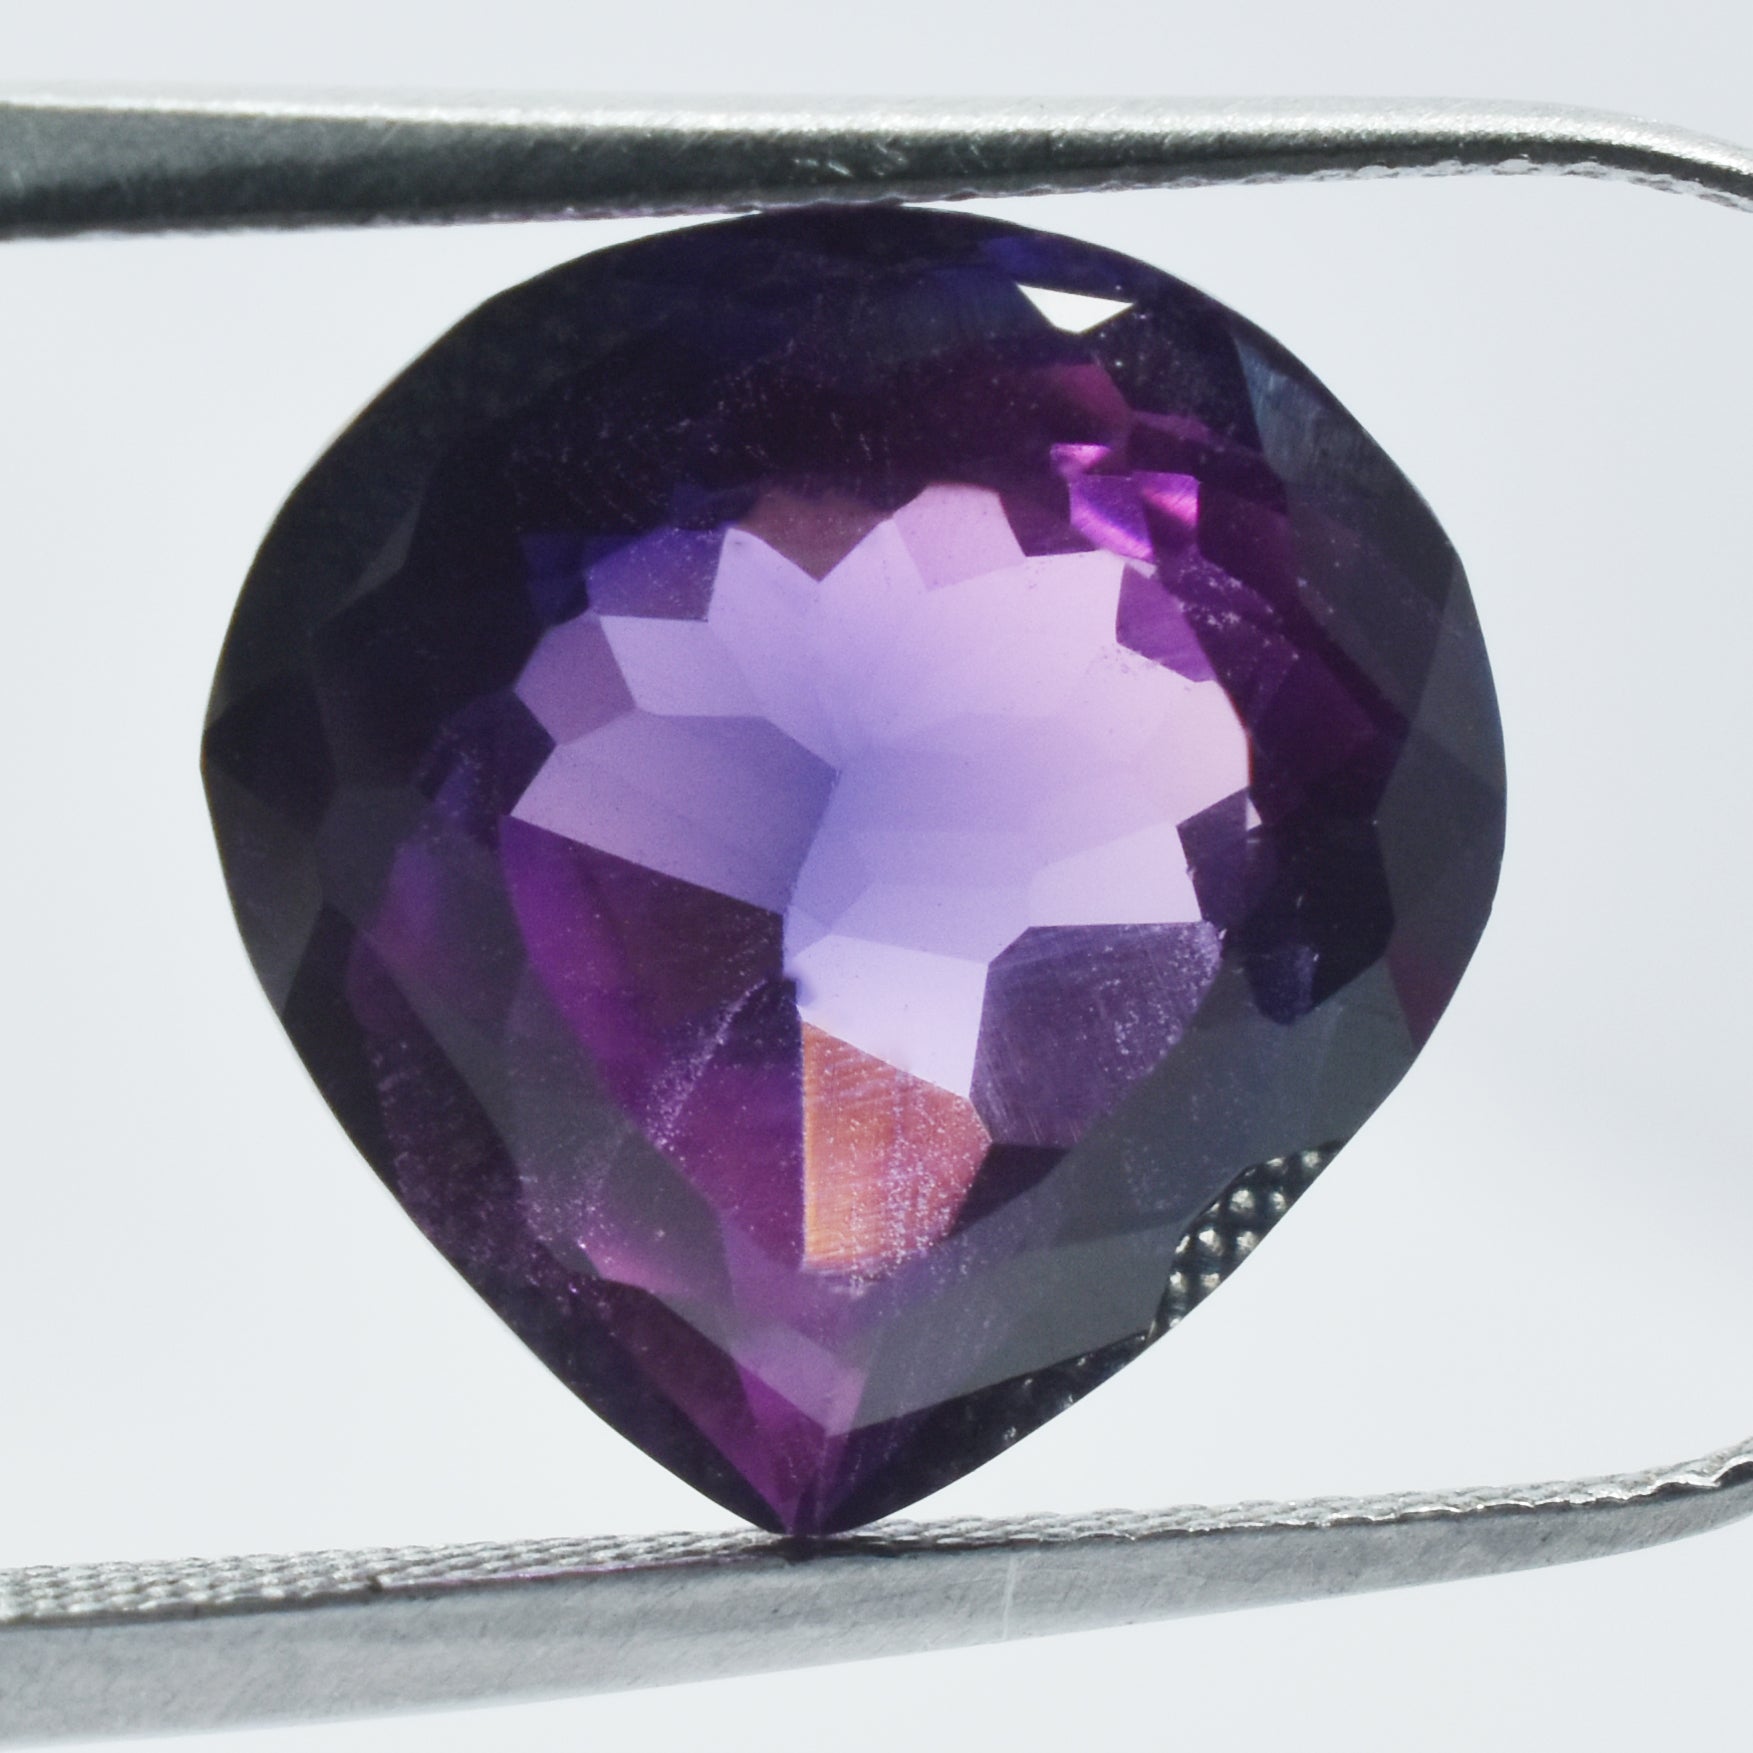 Winter's Best Offer !!! Certified Natural 8.32 Ct Pear Shape Purple Sapphire Color Change Loose Gemstone | Sapphire Bracelets | Free Delivery Free Gift